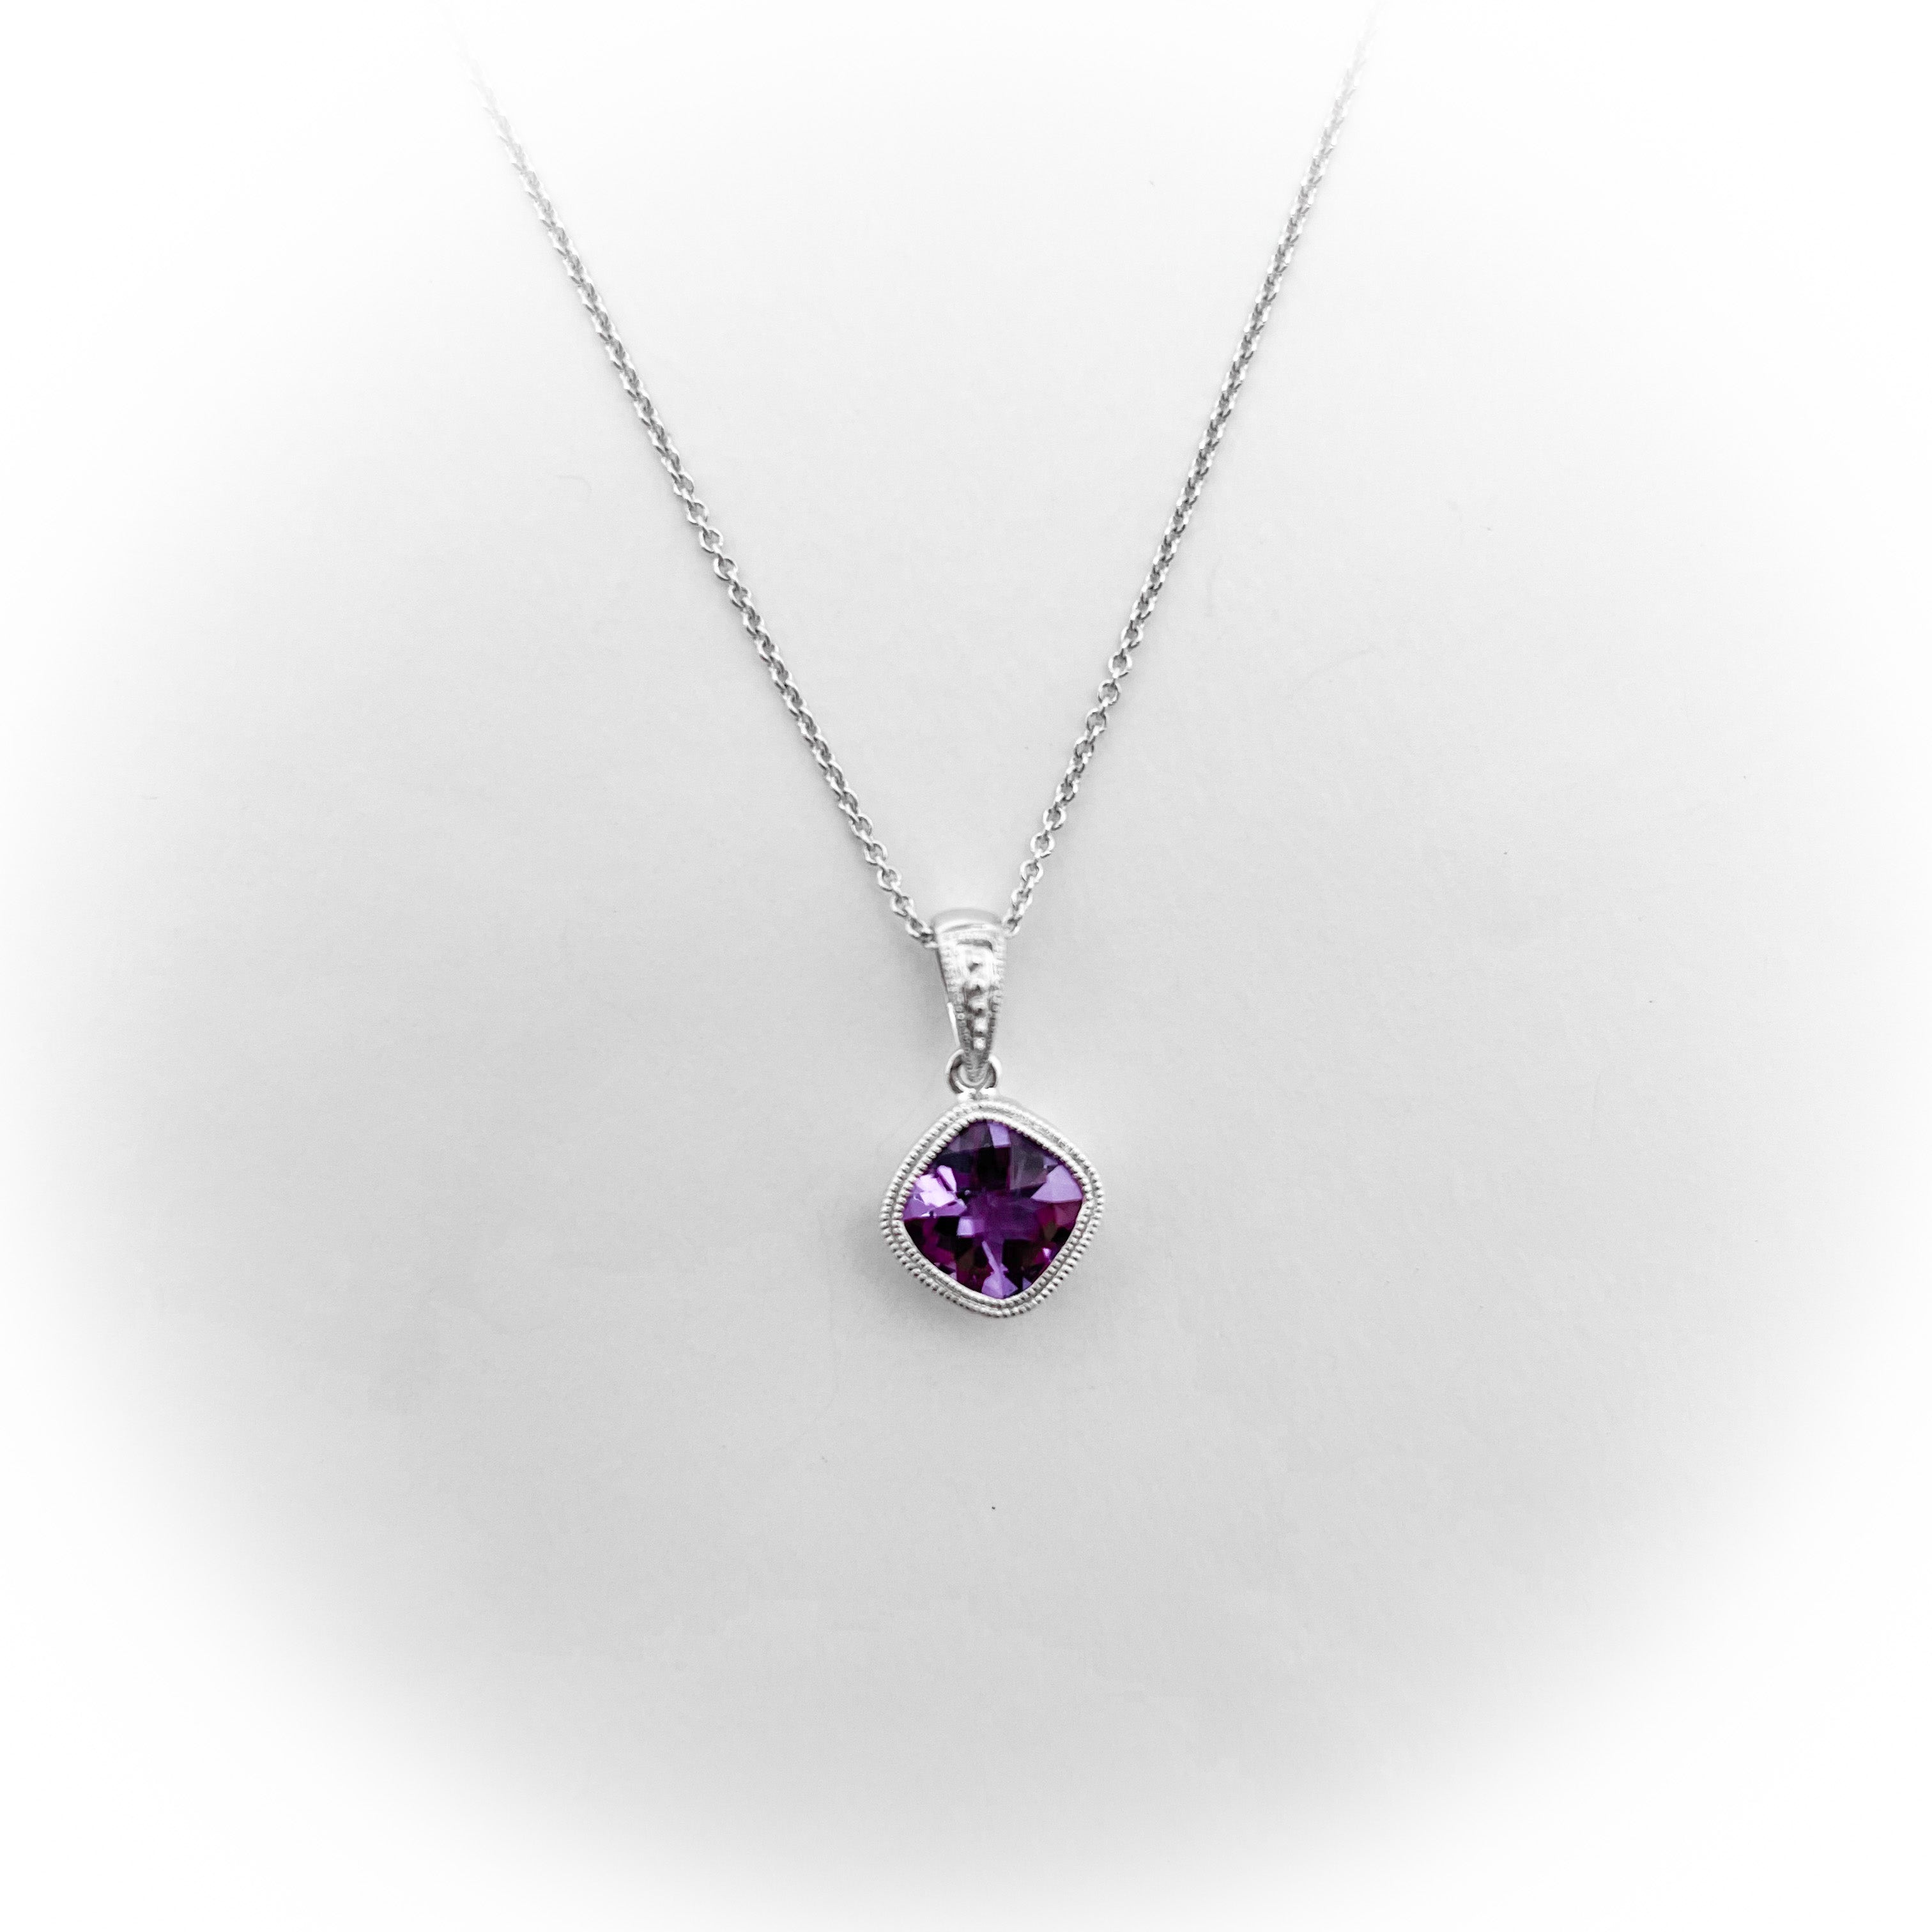 14K WHITE GOLD AMETHYST NECKLACE